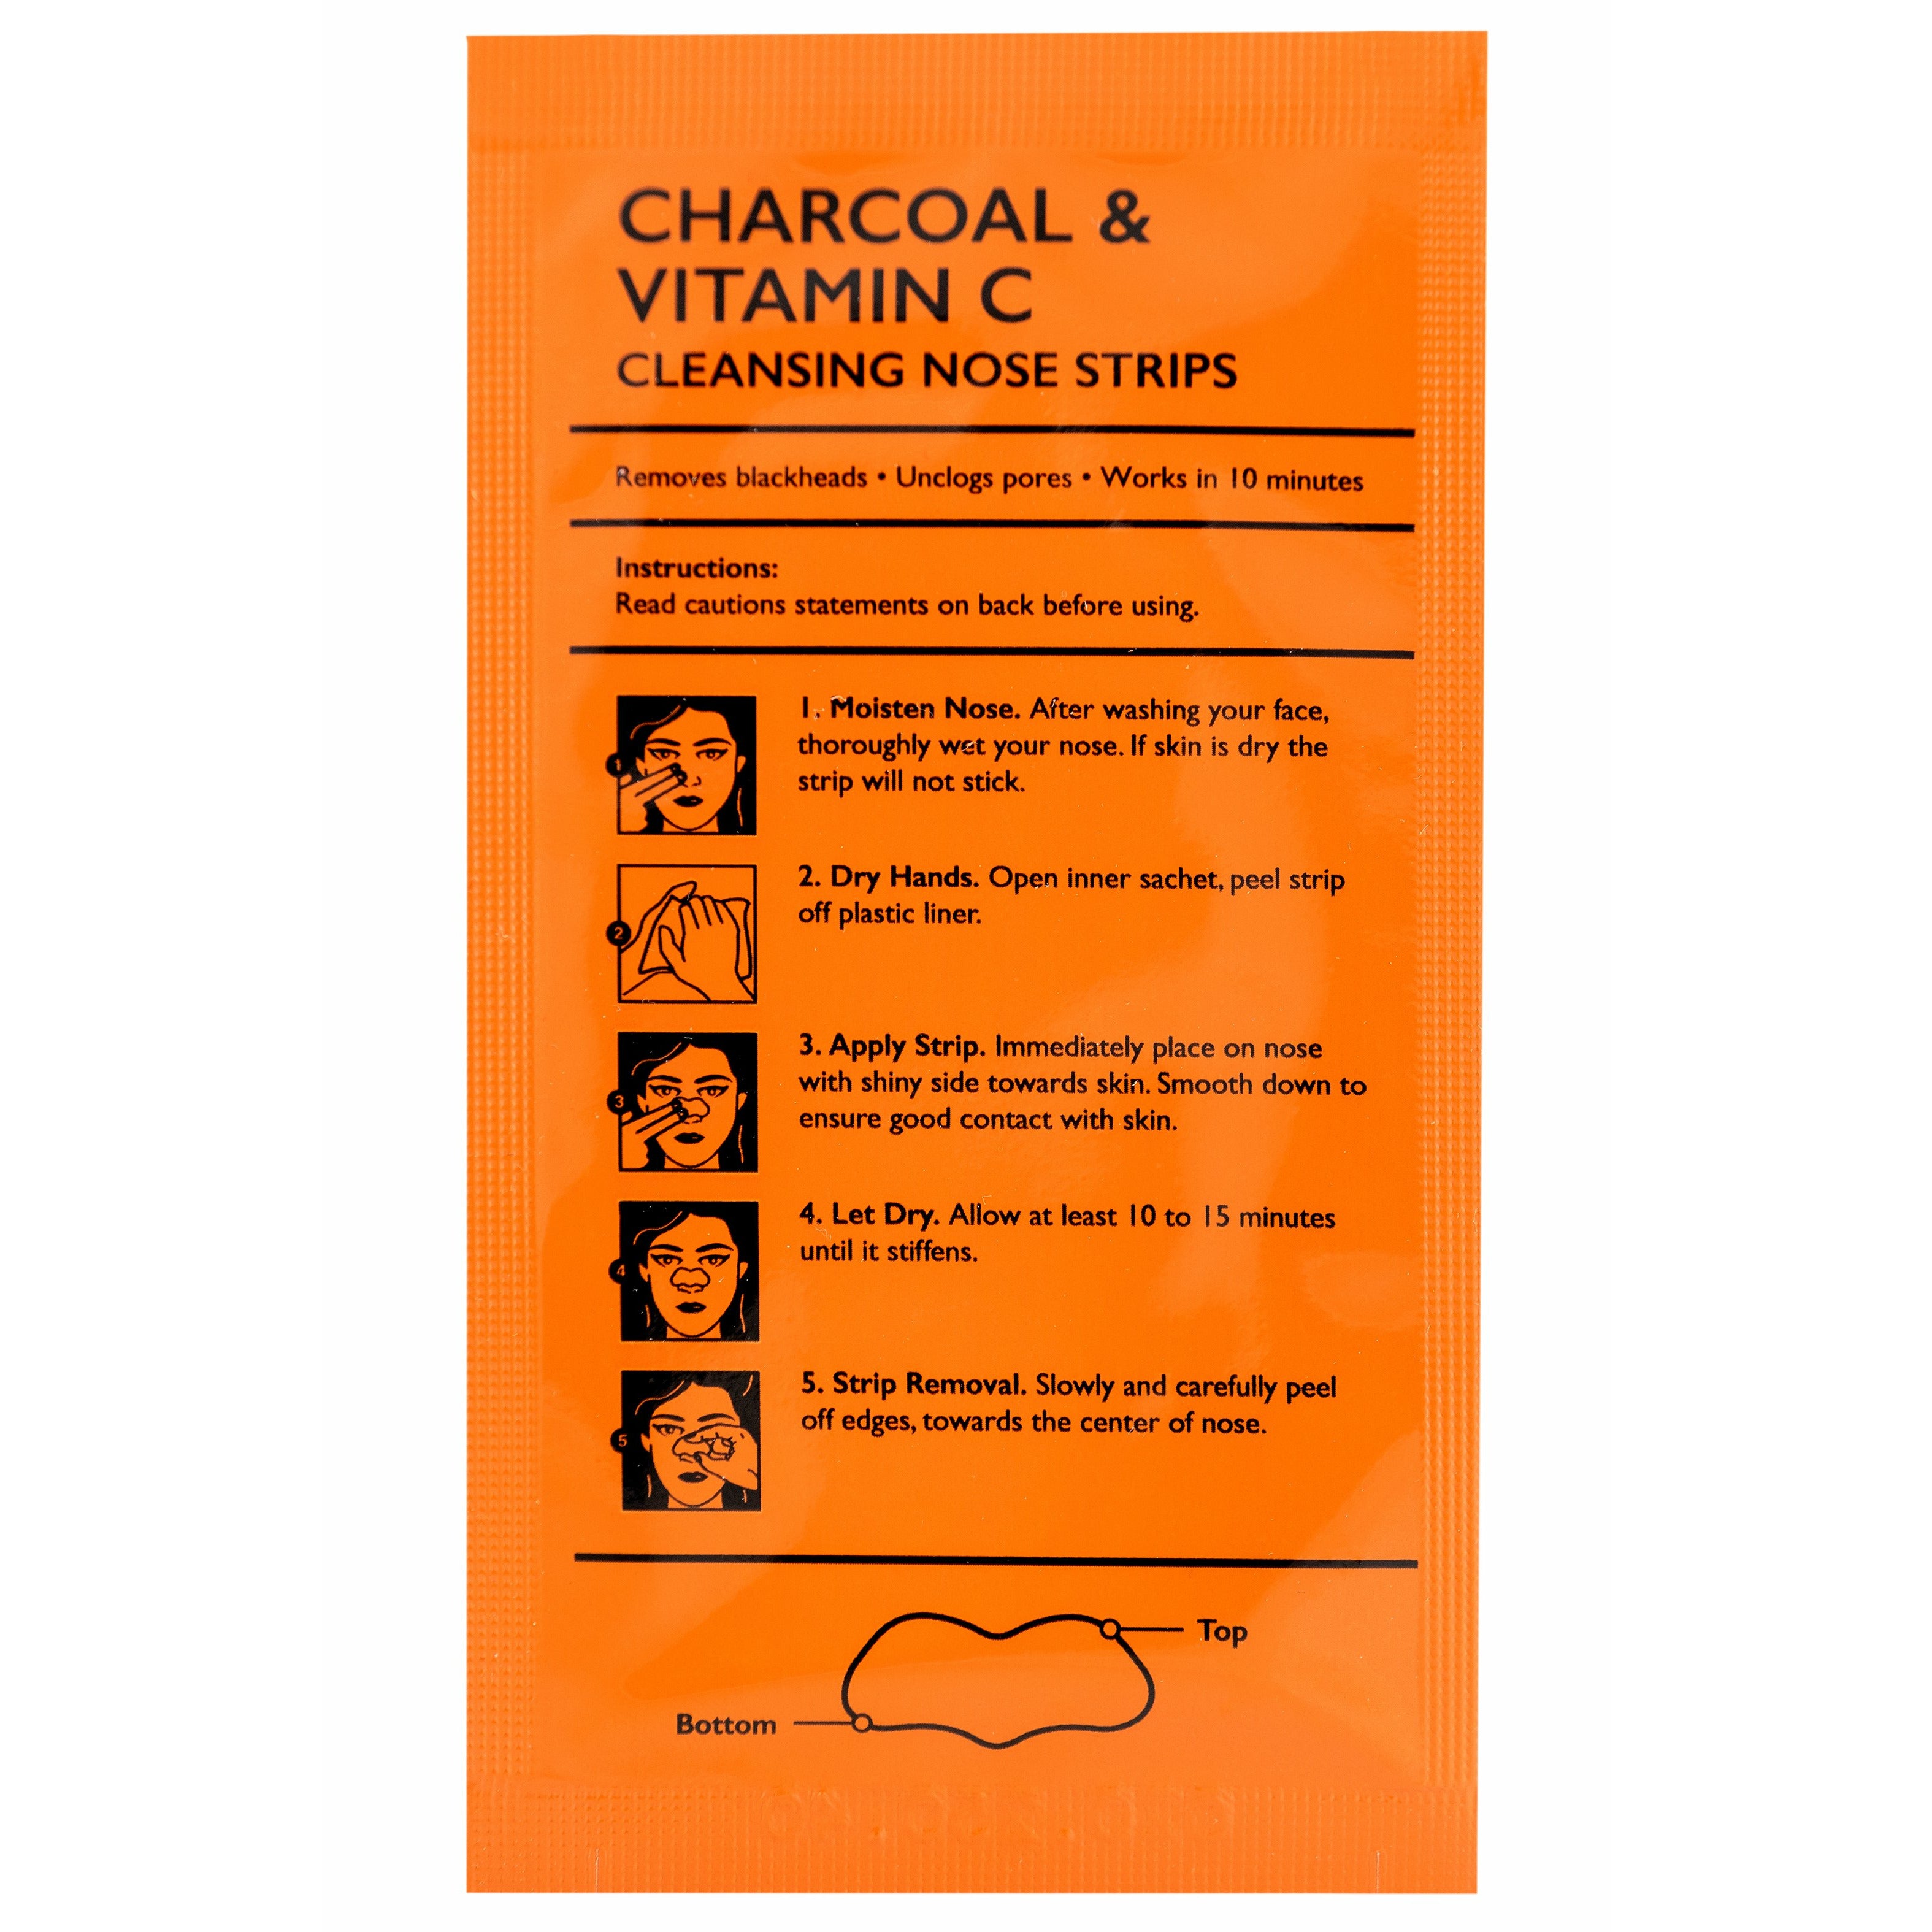 Charcoal & Vitamin C Cleansing Nose Strips